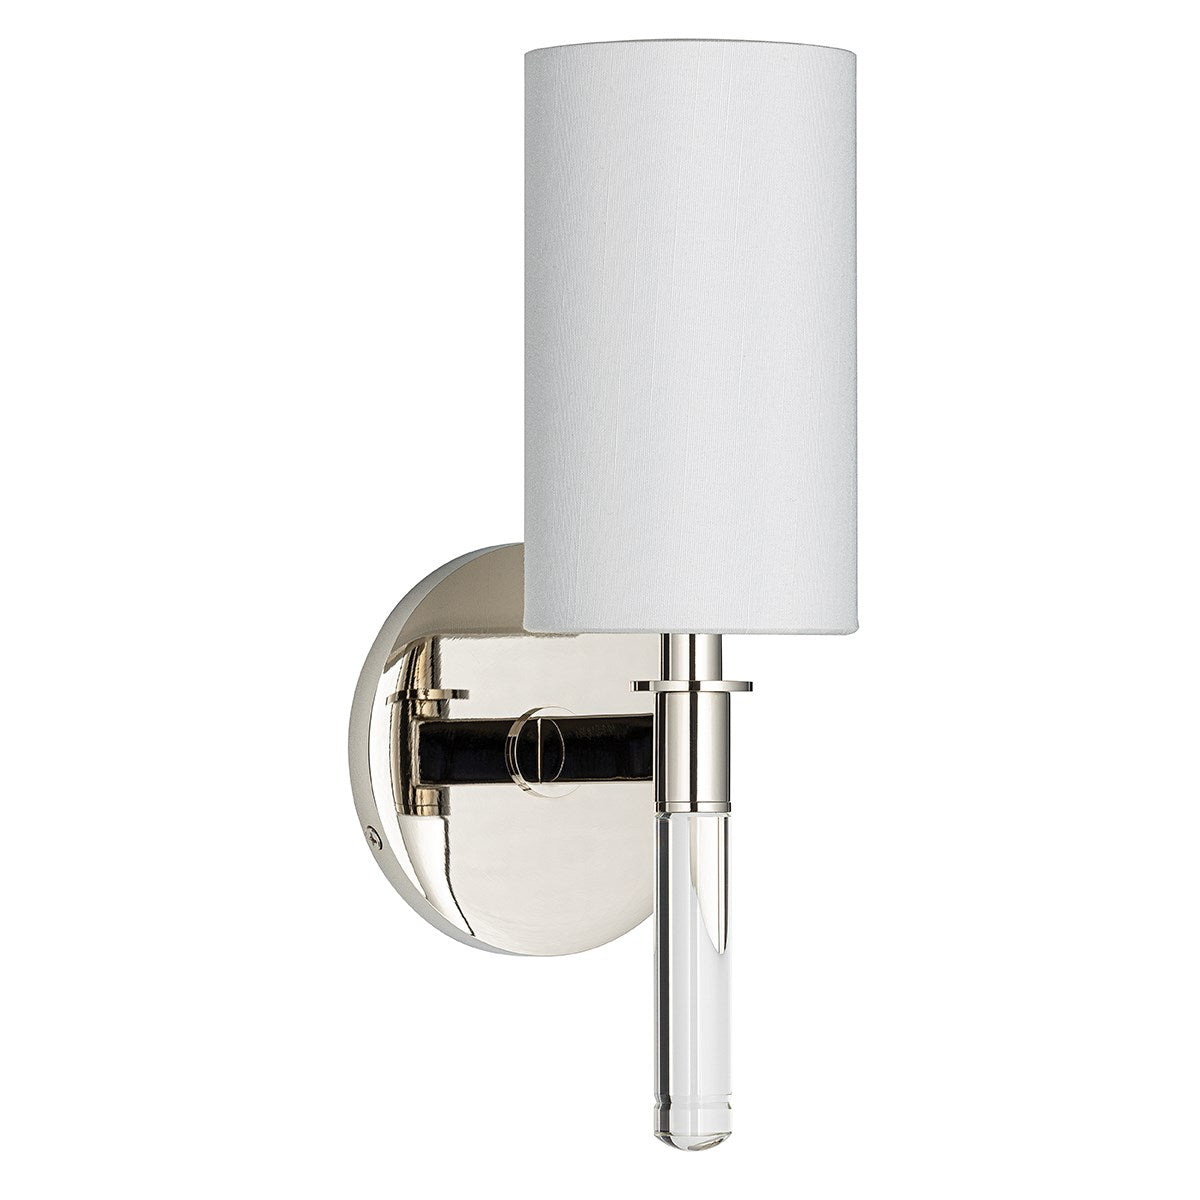 Wylie - 1 LIGHT WALL SCONCE